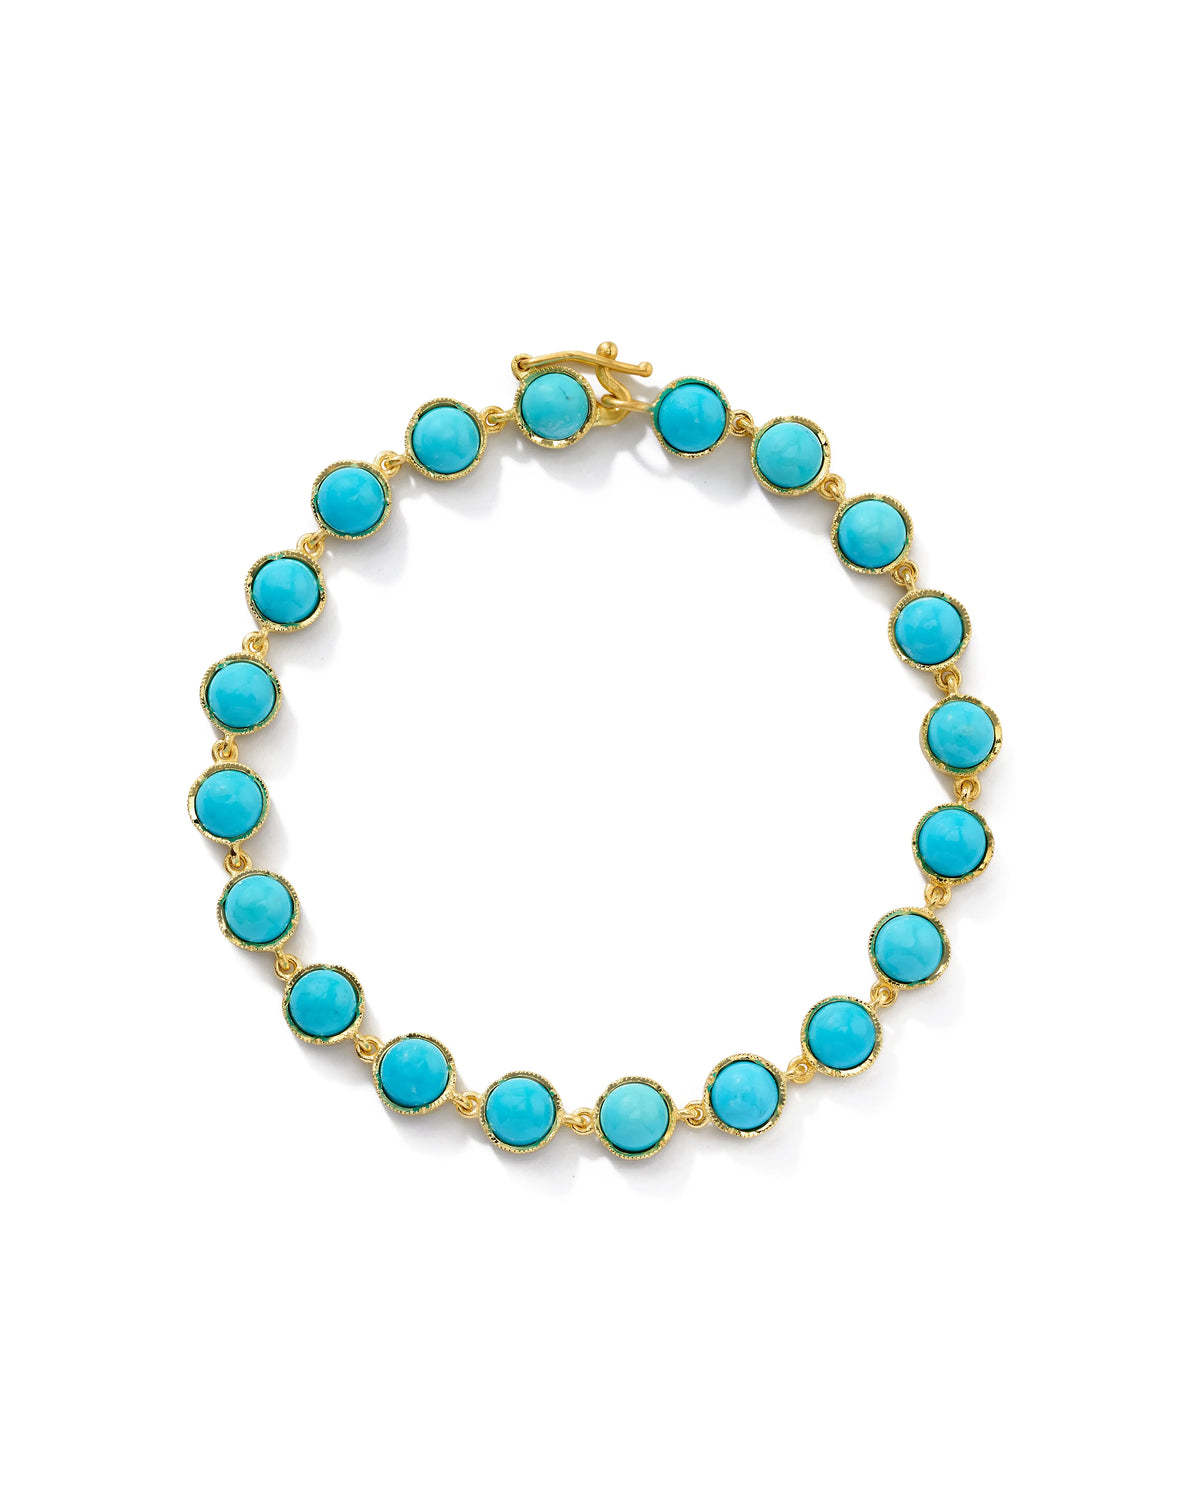 18K Brushed gold bracelet with 5mm with Kingman turquoise stones. A great classic bracelet to wear alone or to stack.   The bracelet measures 7 inches long.  Hidden link clasp with safety latch.  If an item is out of stock, please allow 3-6 weeks for delivery. Email shop@sbvail.com for questions.   Designed by Irene Neuwirth